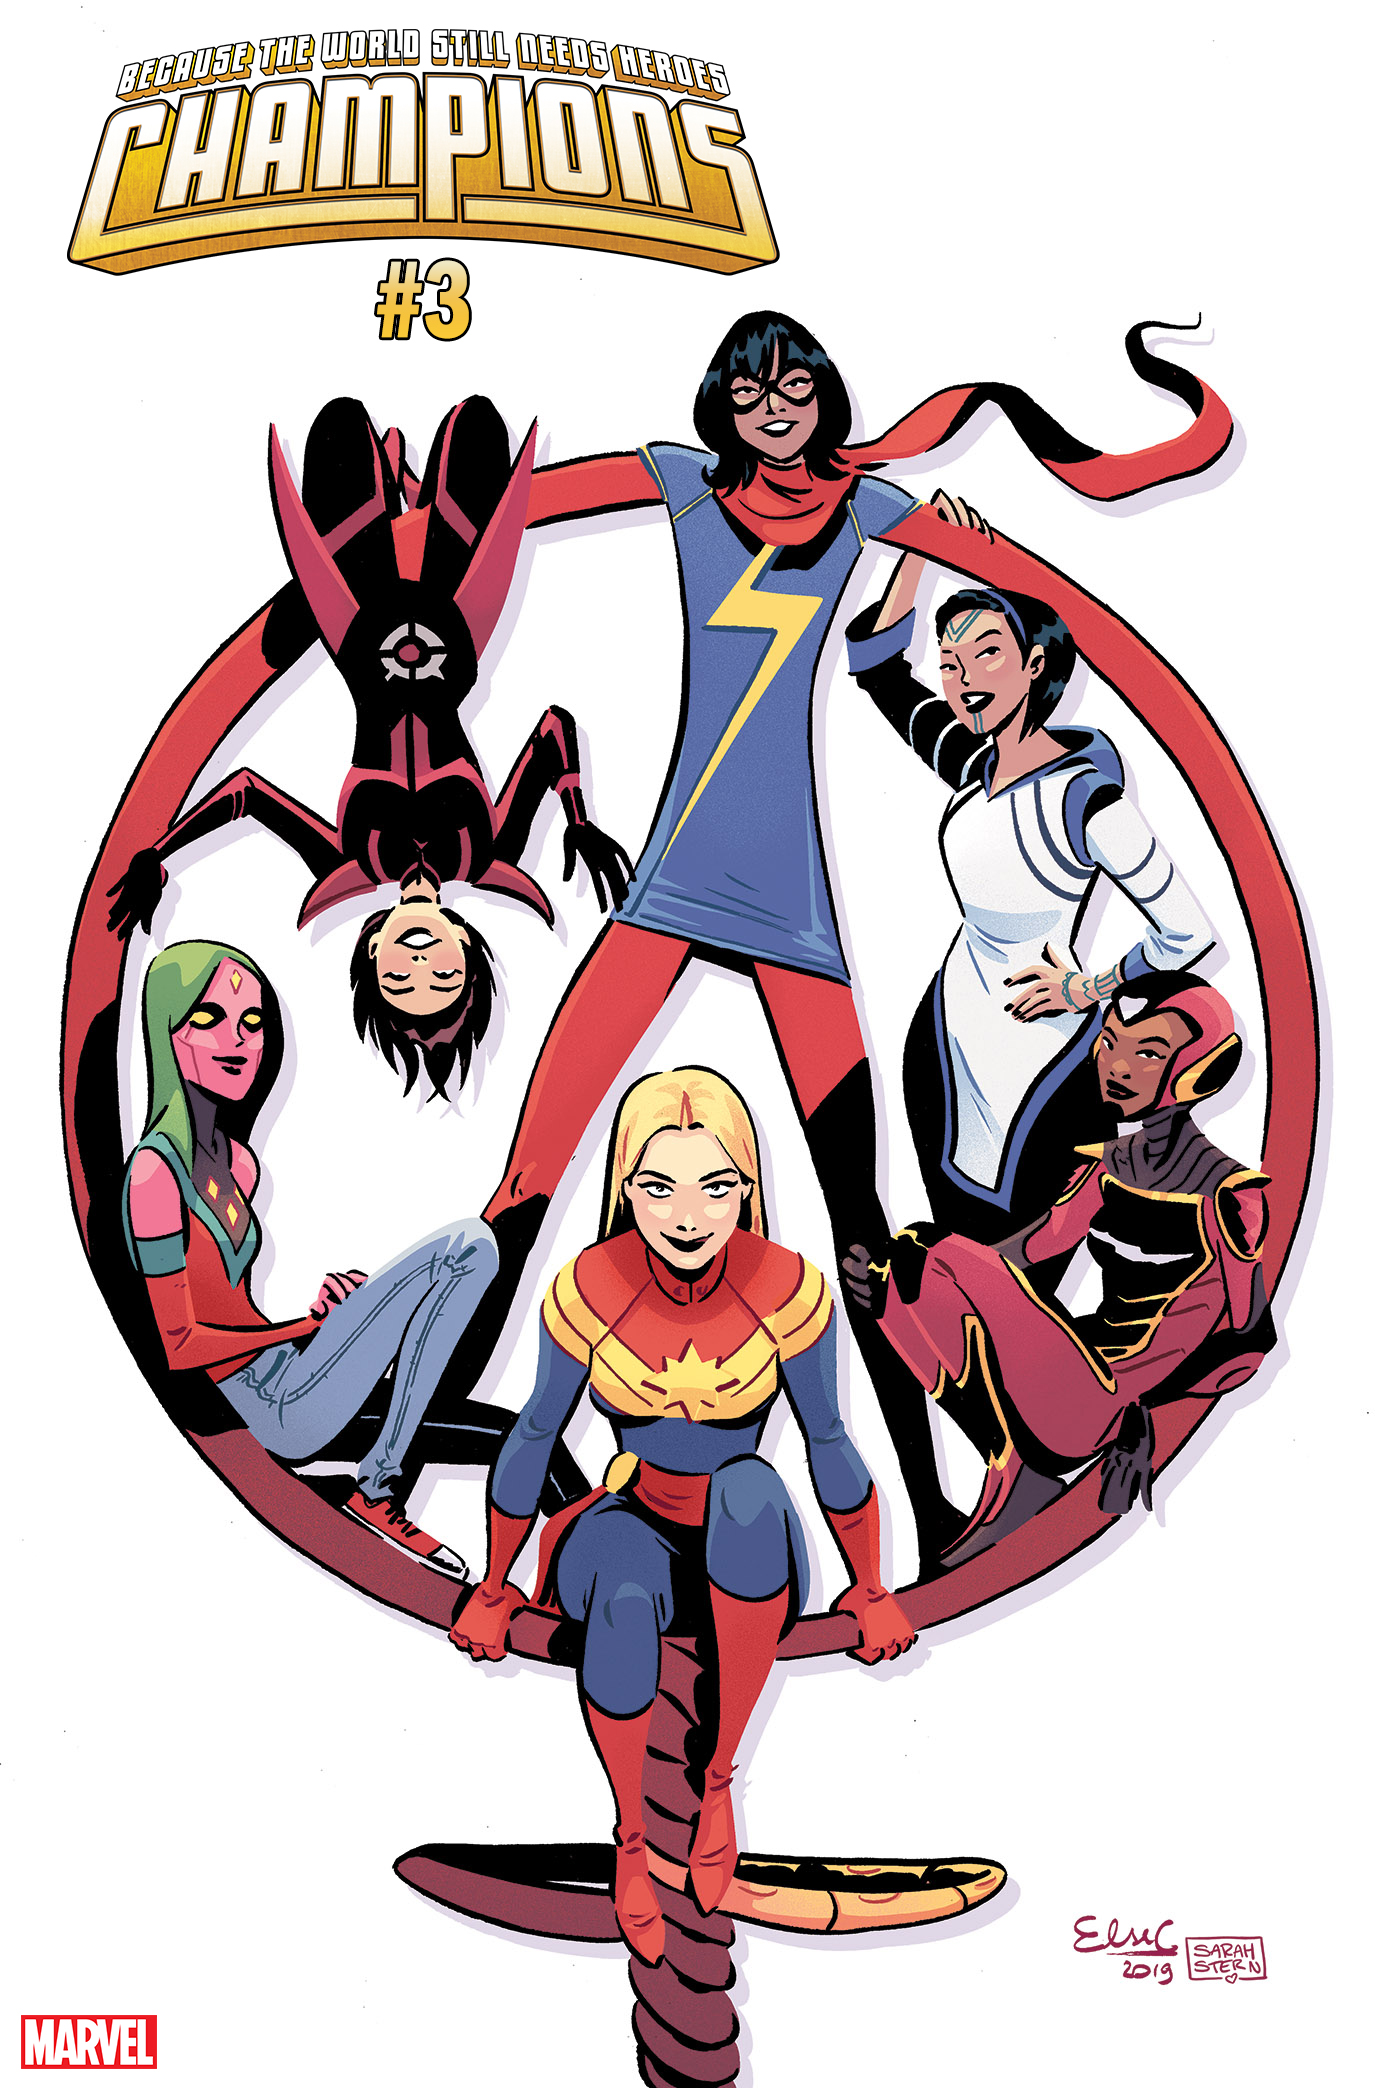 Marvel celebrates International Women's Day with Champions #3 cover